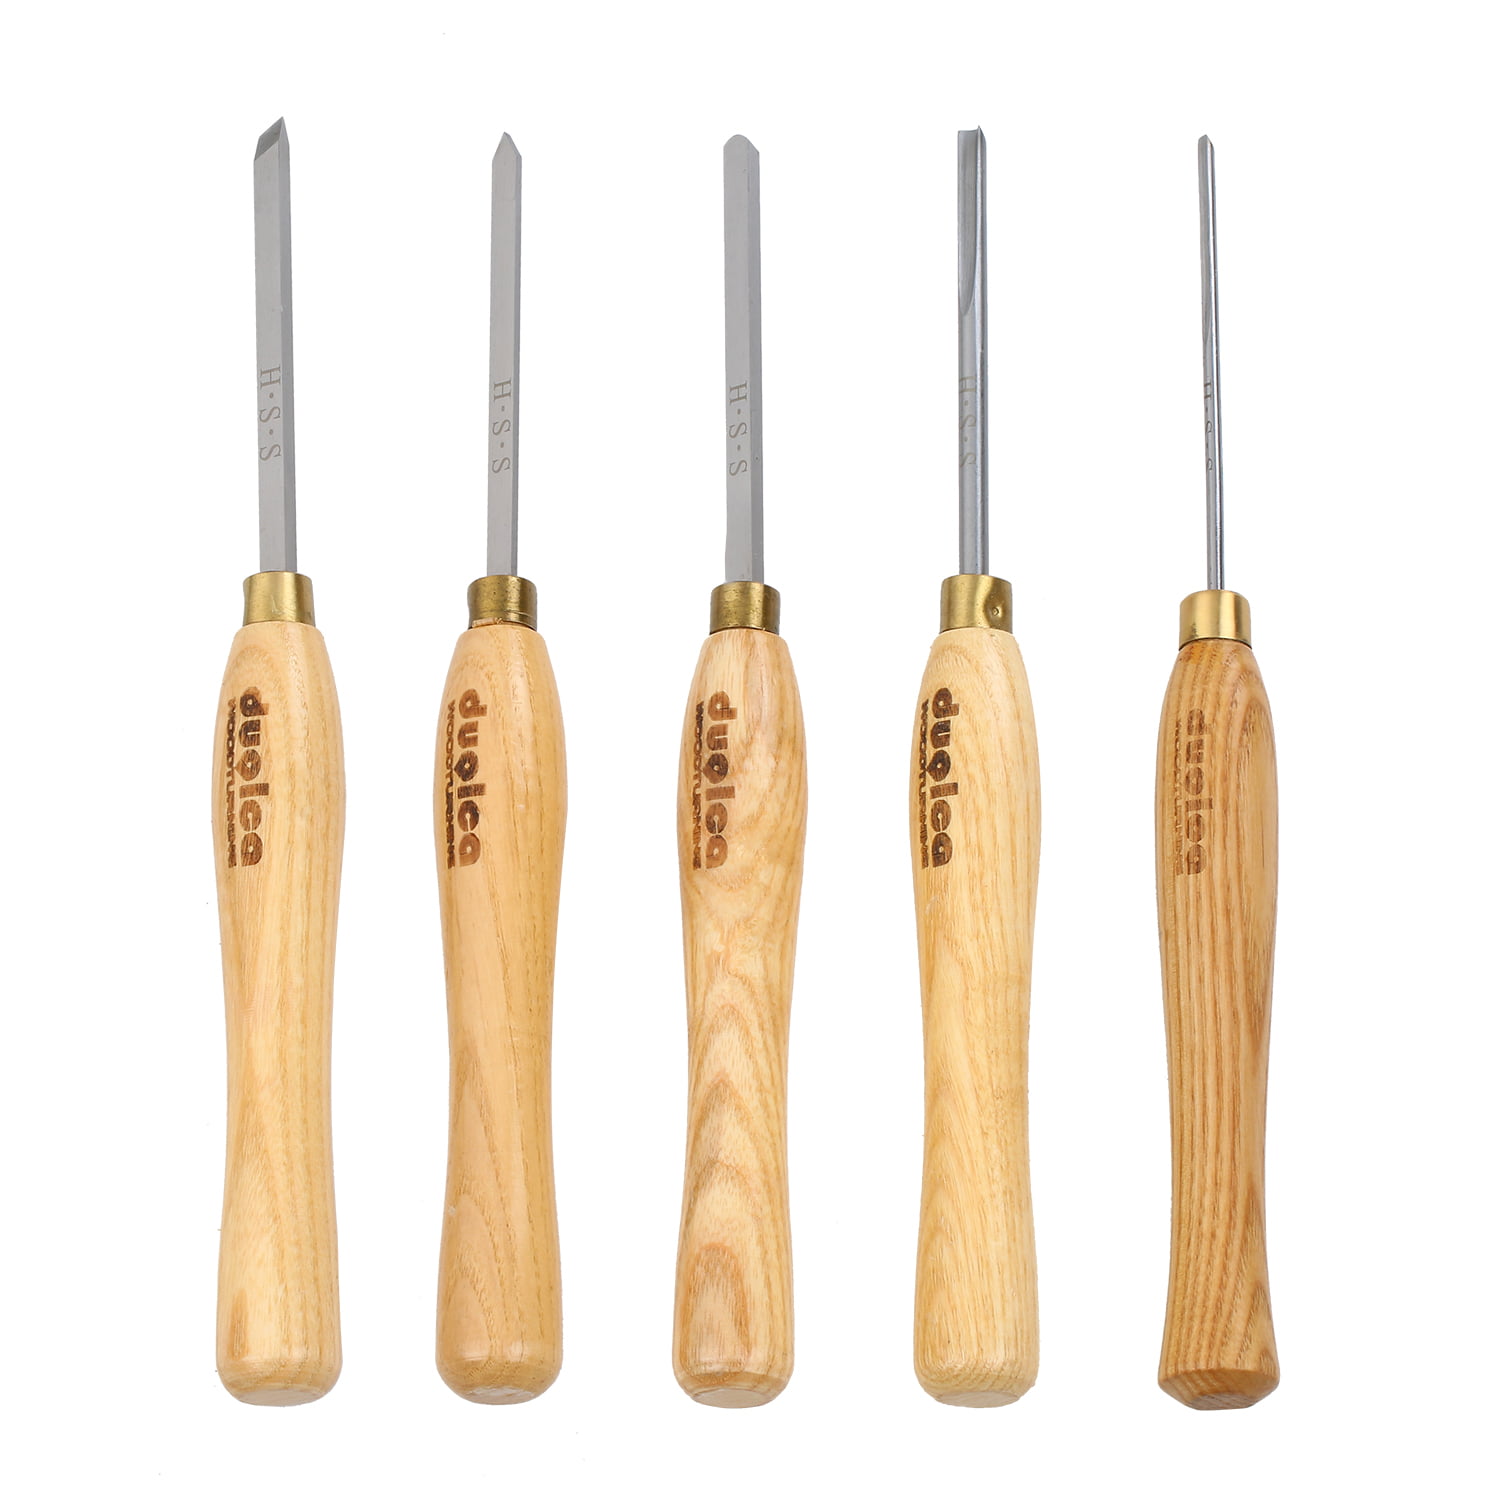 Durable Lathe Wood Turning Chisels Woodturning Carving Woodworking Hand Tools 